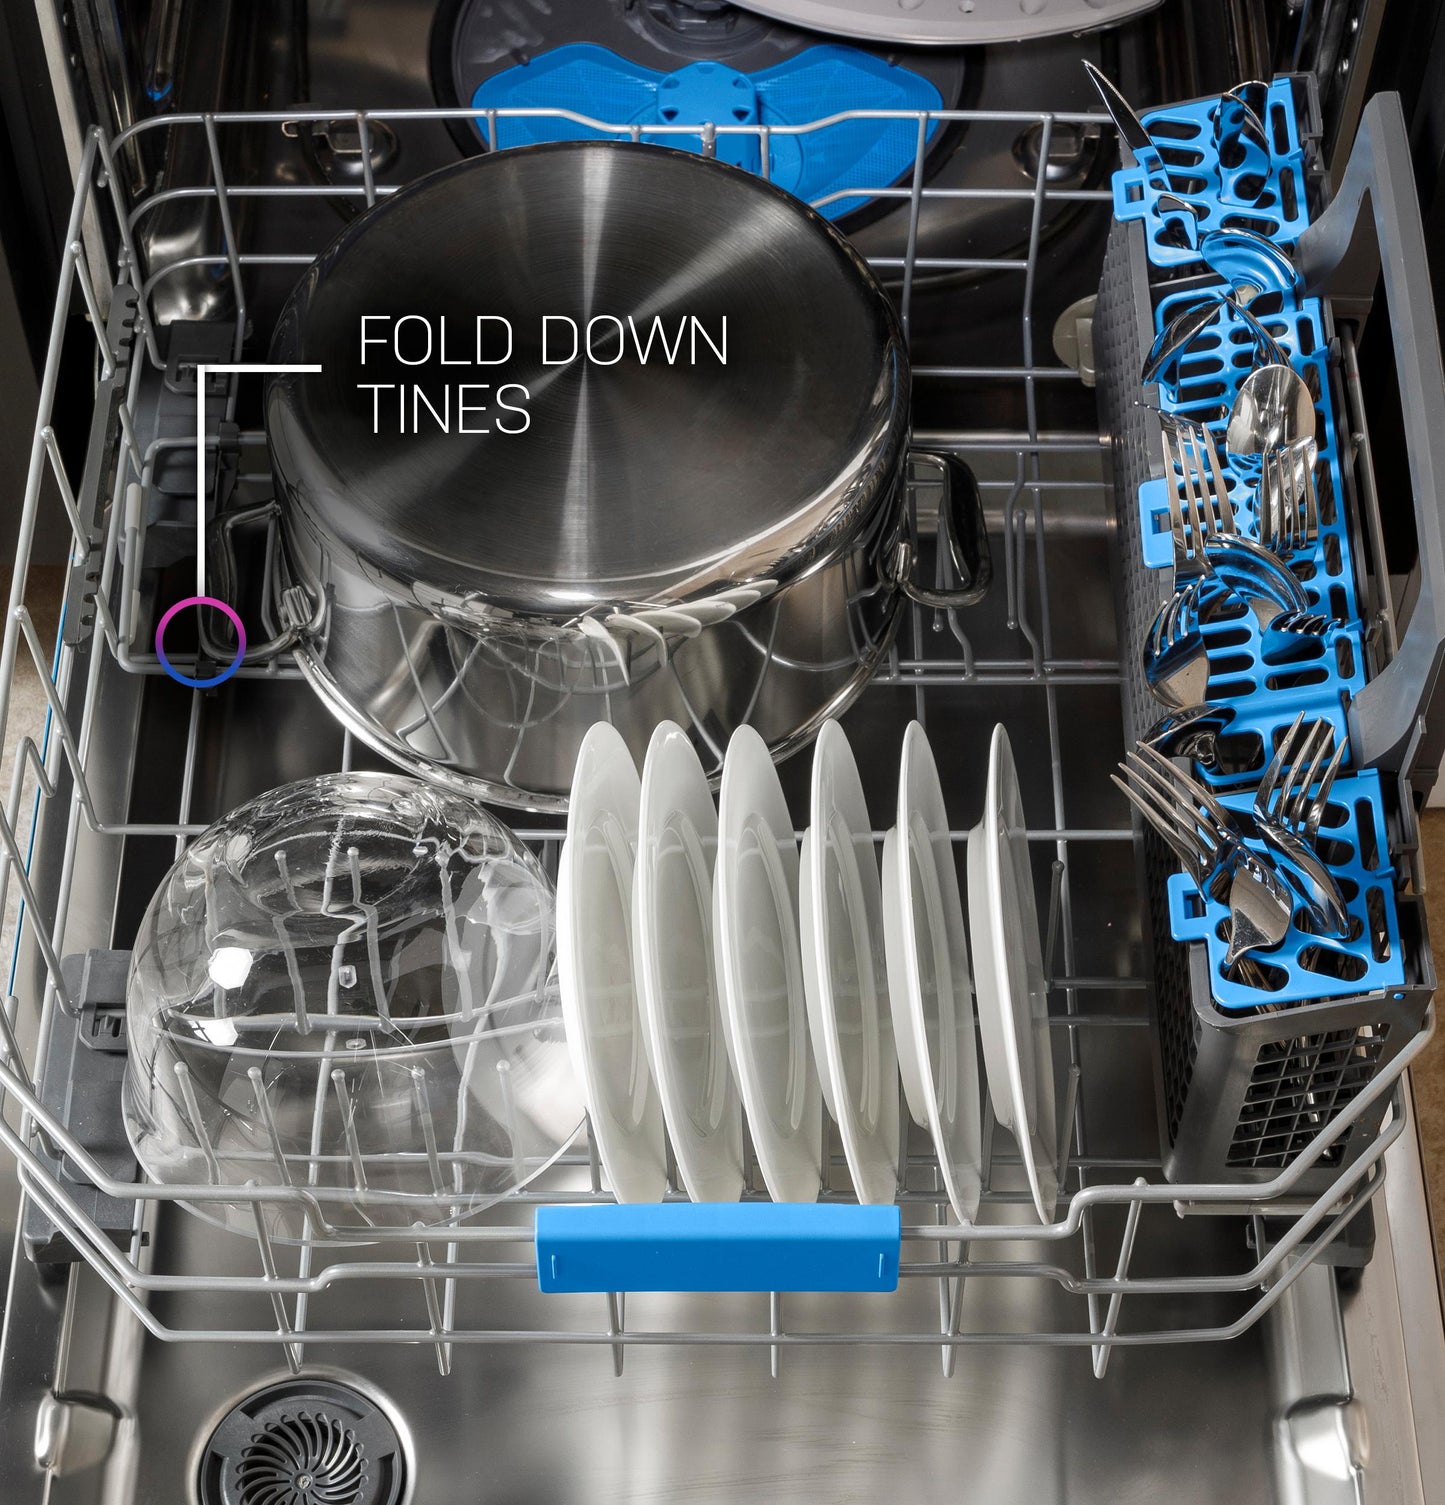 Ge Appliances PDT755SYVFS Ge Profile&#8482; Energy Star Smart Ultrafresh System Dishwasher With Microban&#8482; Antimicrobial Technology With Deep Clean Washing 3Rd Rack, 42 Dba